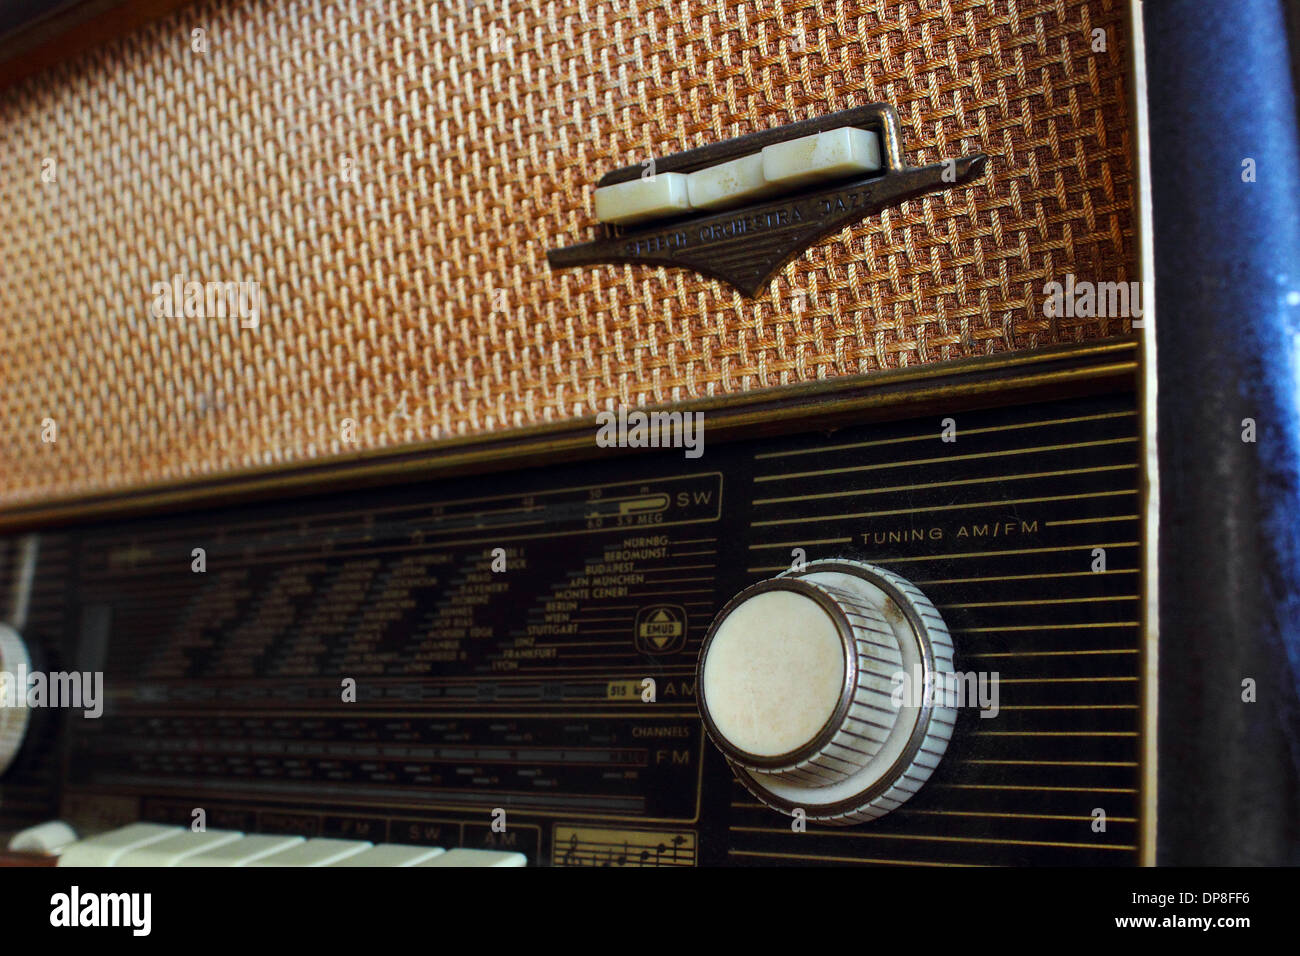 An old 1950's era Emud tube radio. Close up showing dials and buttons Stock  Photo - Alamy